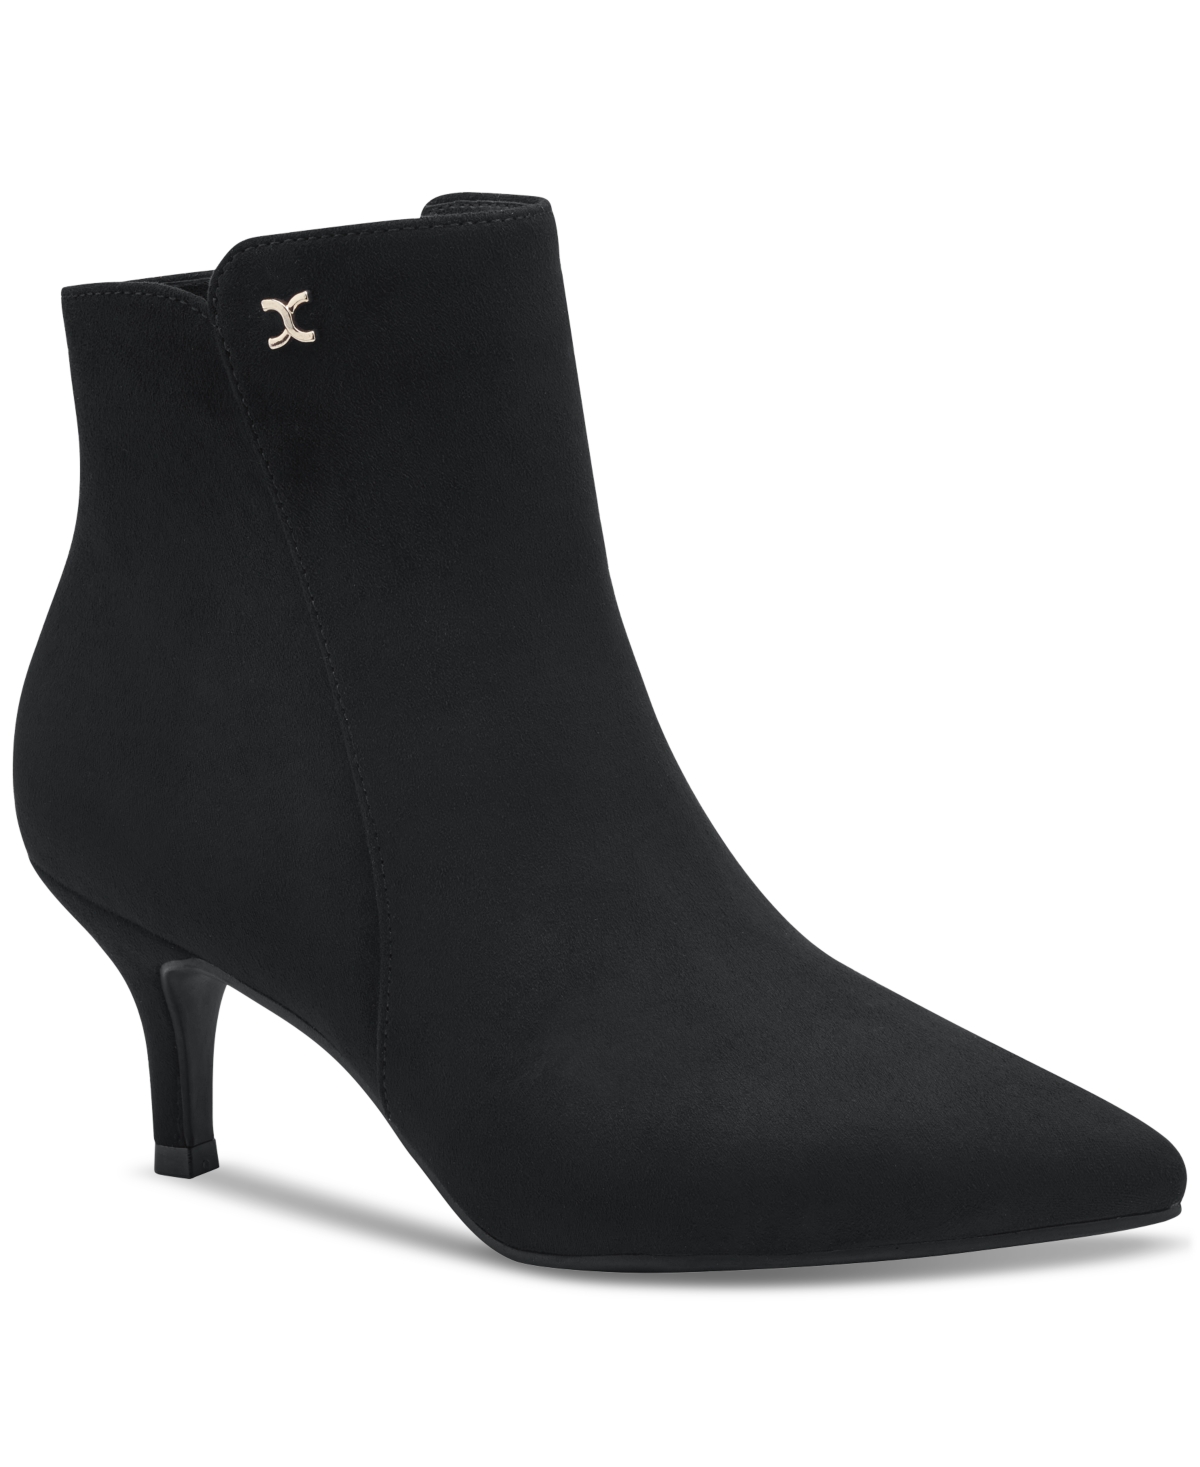 Carminee Pointed-Toe Booties, Created for Macy's - Black Micro